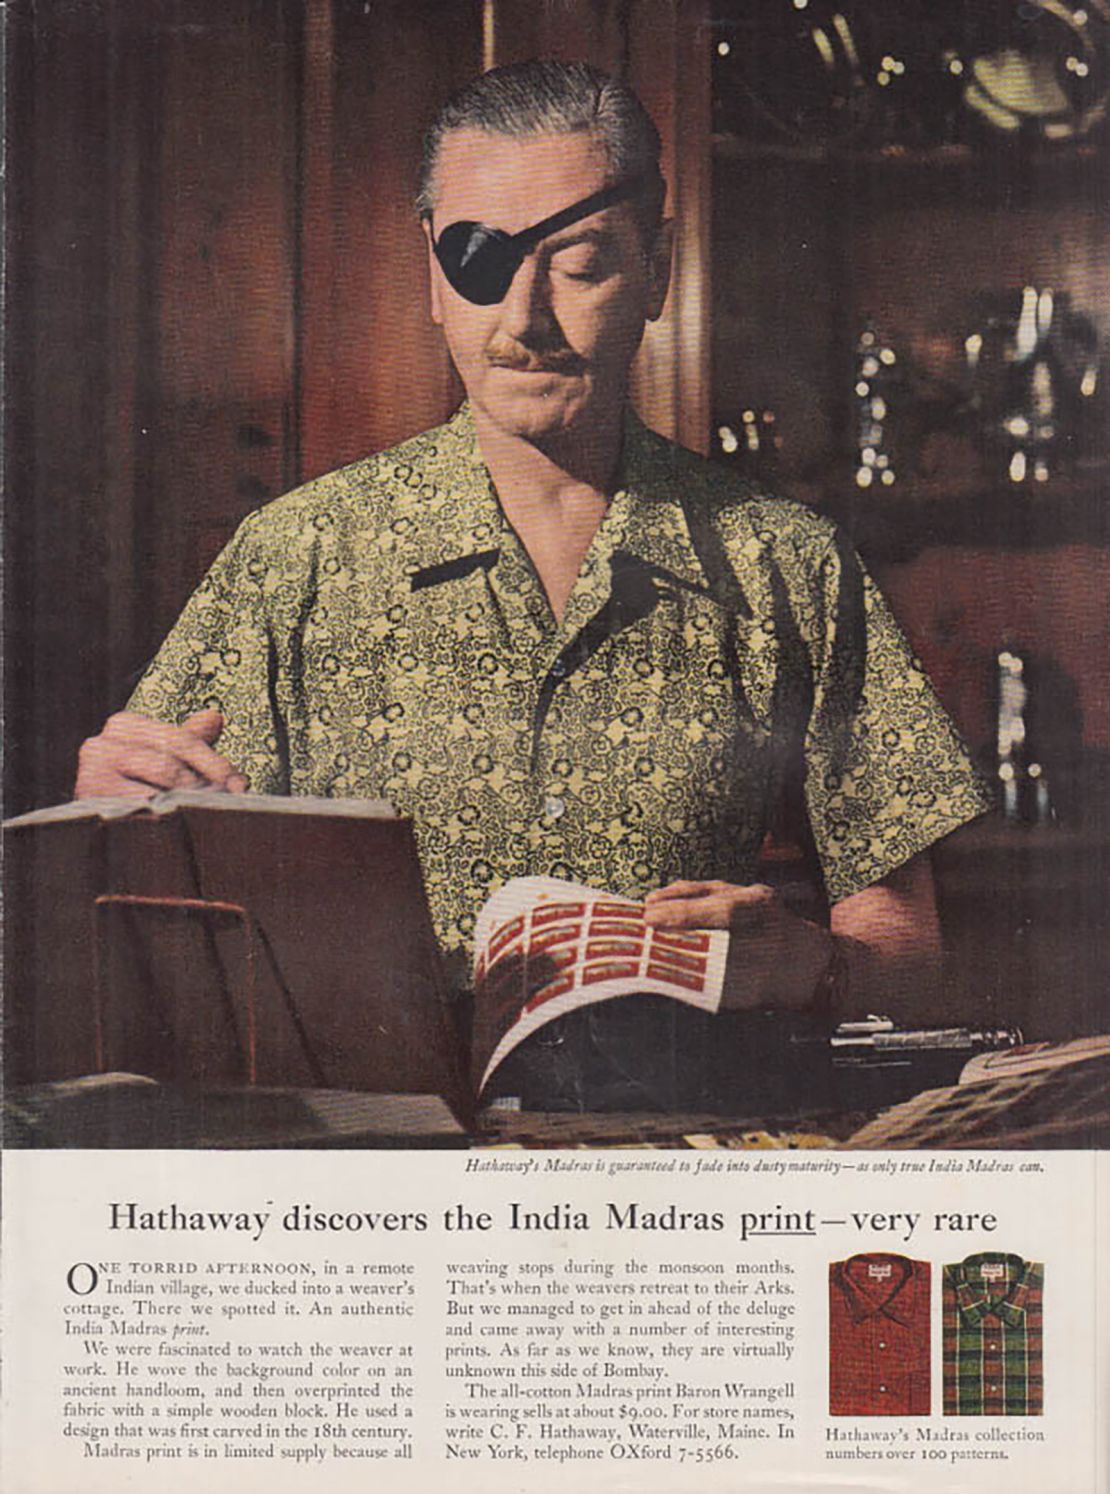 An advert for shirt brand Hathaway boasts of the fabric's rarity.